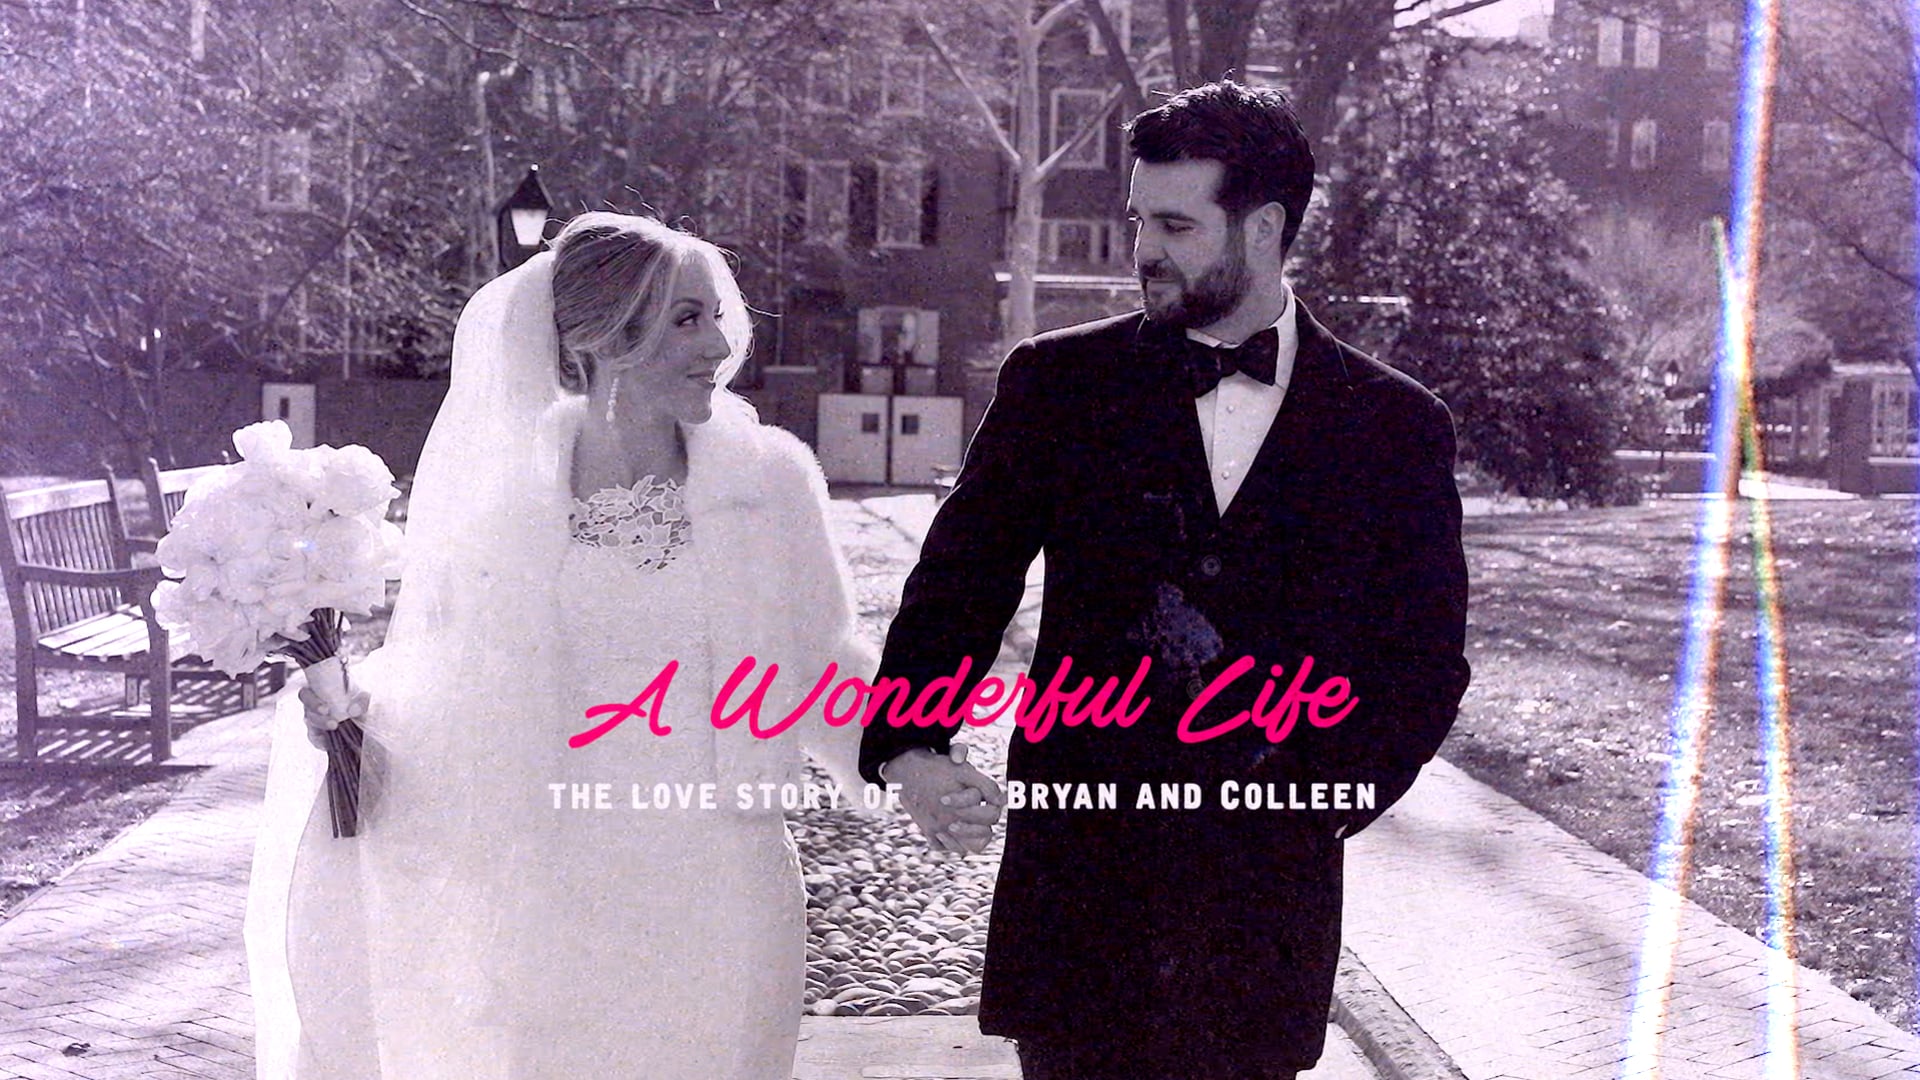 A Wonderful Life: Bryan and Colleen